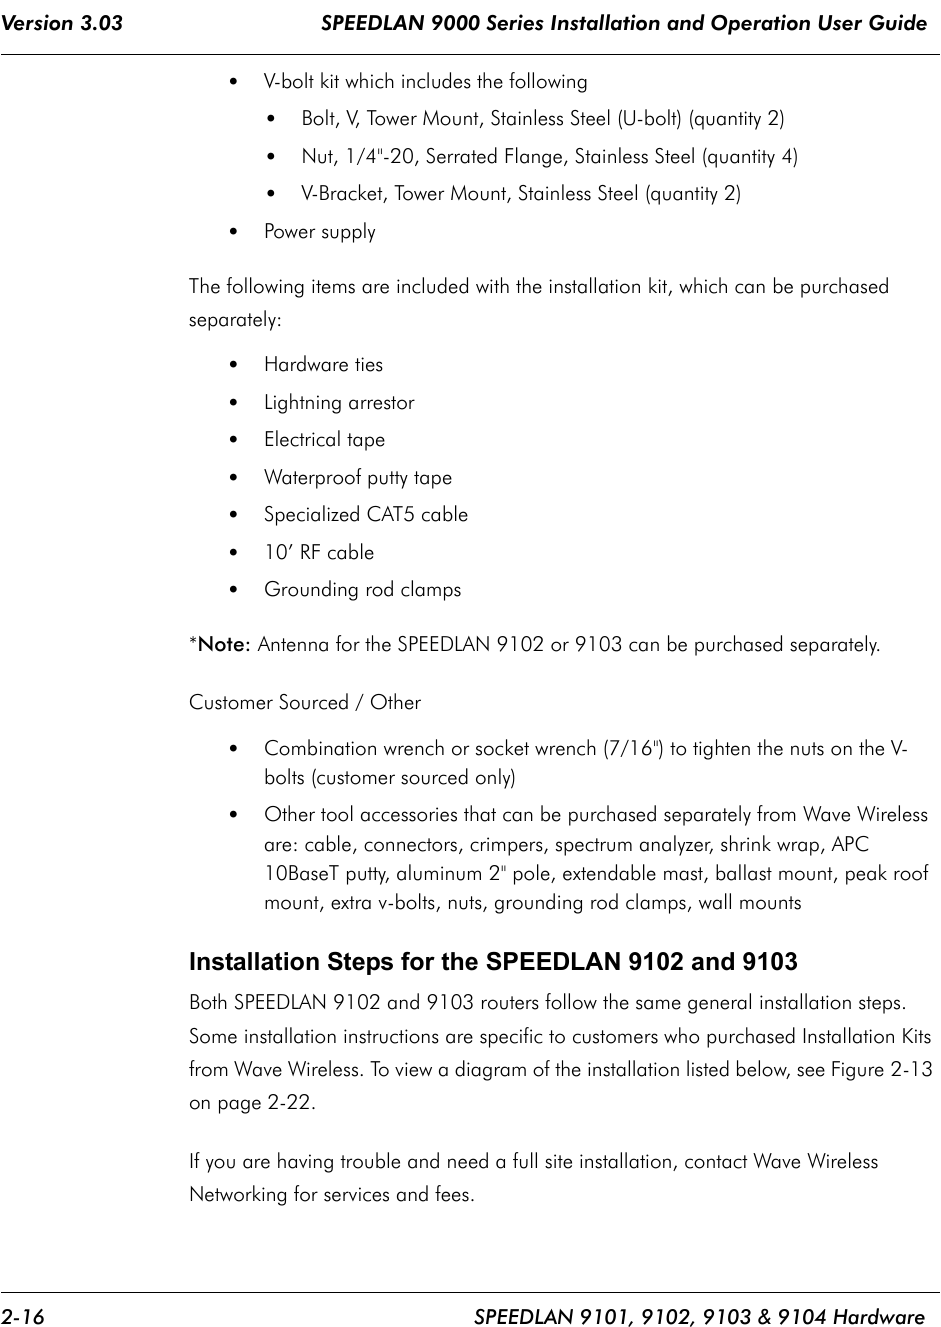 Version 3.03                                SPEEDLAN 9000 Series Installation and Operation User Guide 2-16 SPEEDLAN 9101, 9102, 9103 &amp; 9104 Hardware•V-bolt kit which includes the following •Bolt, V, Tower Mount, Stainless Steel (U-bolt) (quantity 2)•Nut, 1/4&quot;-20, Serrated Flange, Stainless Steel (quantity 4)•V-Bracket, Tower Mount, Stainless Steel (quantity 2)•Power supplyThe following items are included with the installation kit, which can be purchased separately:•Hardware ties •Lightning arrestor  •Electrical tape•Waterproof putty tape •Specialized CAT5 cable•10’ RF cable•Grounding rod clamps*Note: Antenna for the SPEEDLAN 9102 or 9103 can be purchased separately.Customer Sourced / Other•Combination wrench or socket wrench (7/16&quot;) to tighten the nuts on the V-bolts (customer sourced only)•Other tool accessories that can be purchased separately from Wave Wireless are: cable, connectors, crimpers, spectrum analyzer, shrink wrap, APC 10BaseT putty, aluminum 2&quot; pole, extendable mast, ballast mount, peak roof mount, extra v-bolts, nuts, grounding rod clamps, wall mountsInstallation Steps for the SPEEDLAN 9102 and 9103Both SPEEDLAN 9102 and 9103 routers follow the same general installation steps. Some installation instructions are specific to customers who purchased Installation Kits from Wave Wireless. To view a diagram of the installation listed below, see Figure 2-13 on page 2-22.  If you are having trouble and need a full site installation, contact Wave Wireless Networking for services and fees. 